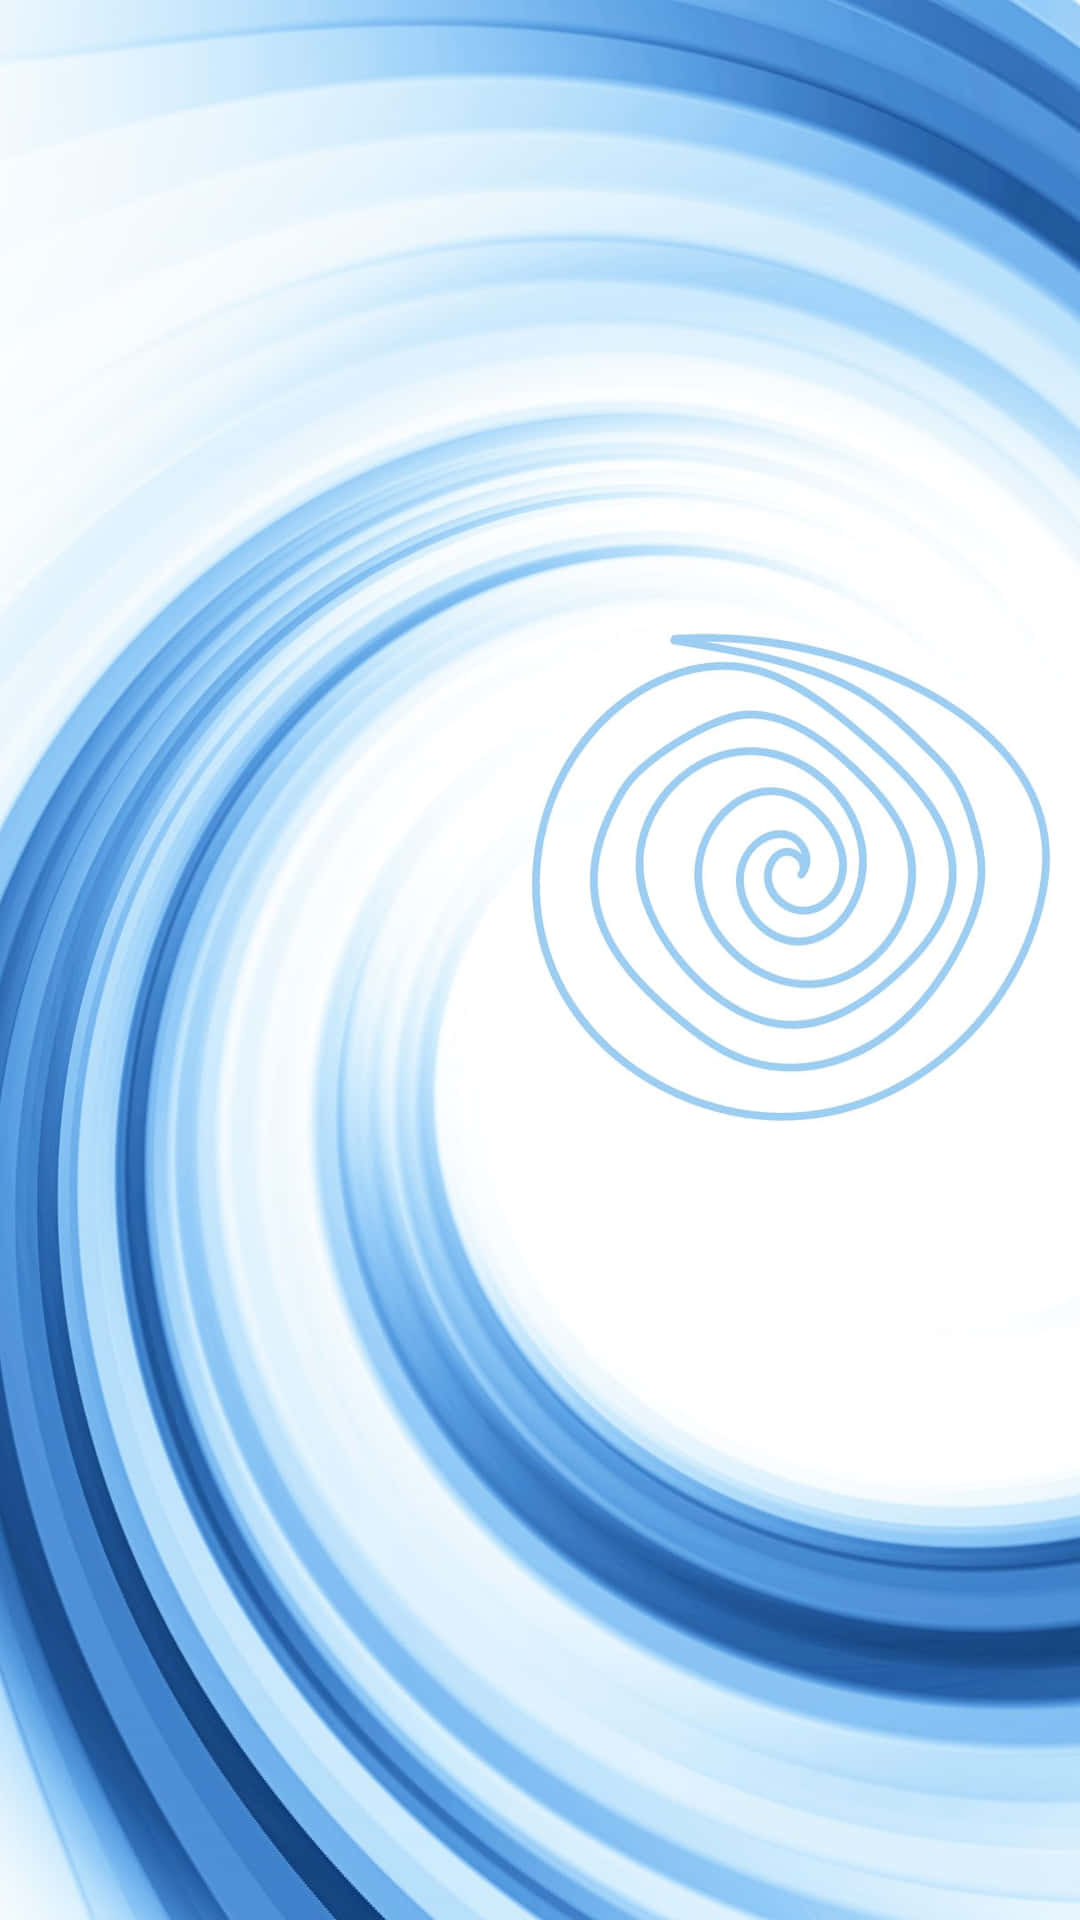 Blue Swirl - Background with a contemporary twist.